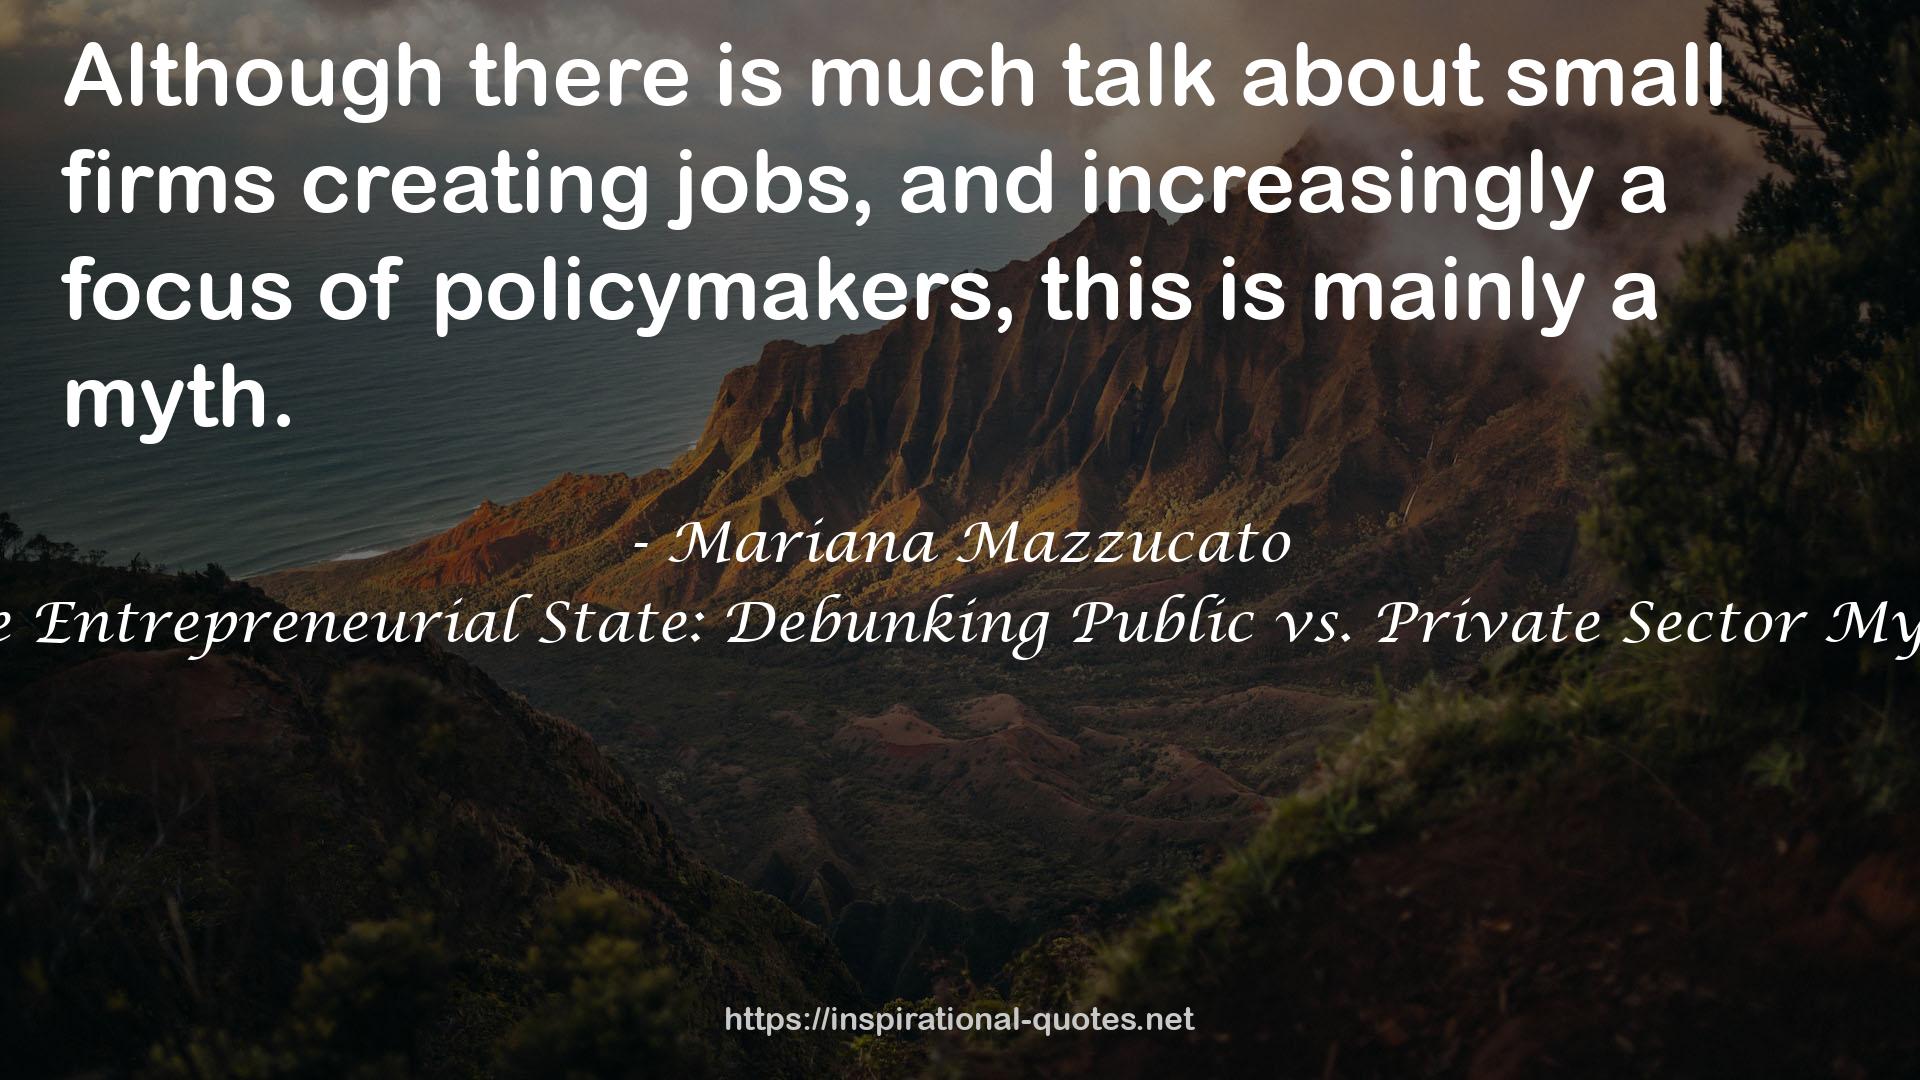 The Entrepreneurial State: Debunking Public vs. Private Sector Myths QUOTES